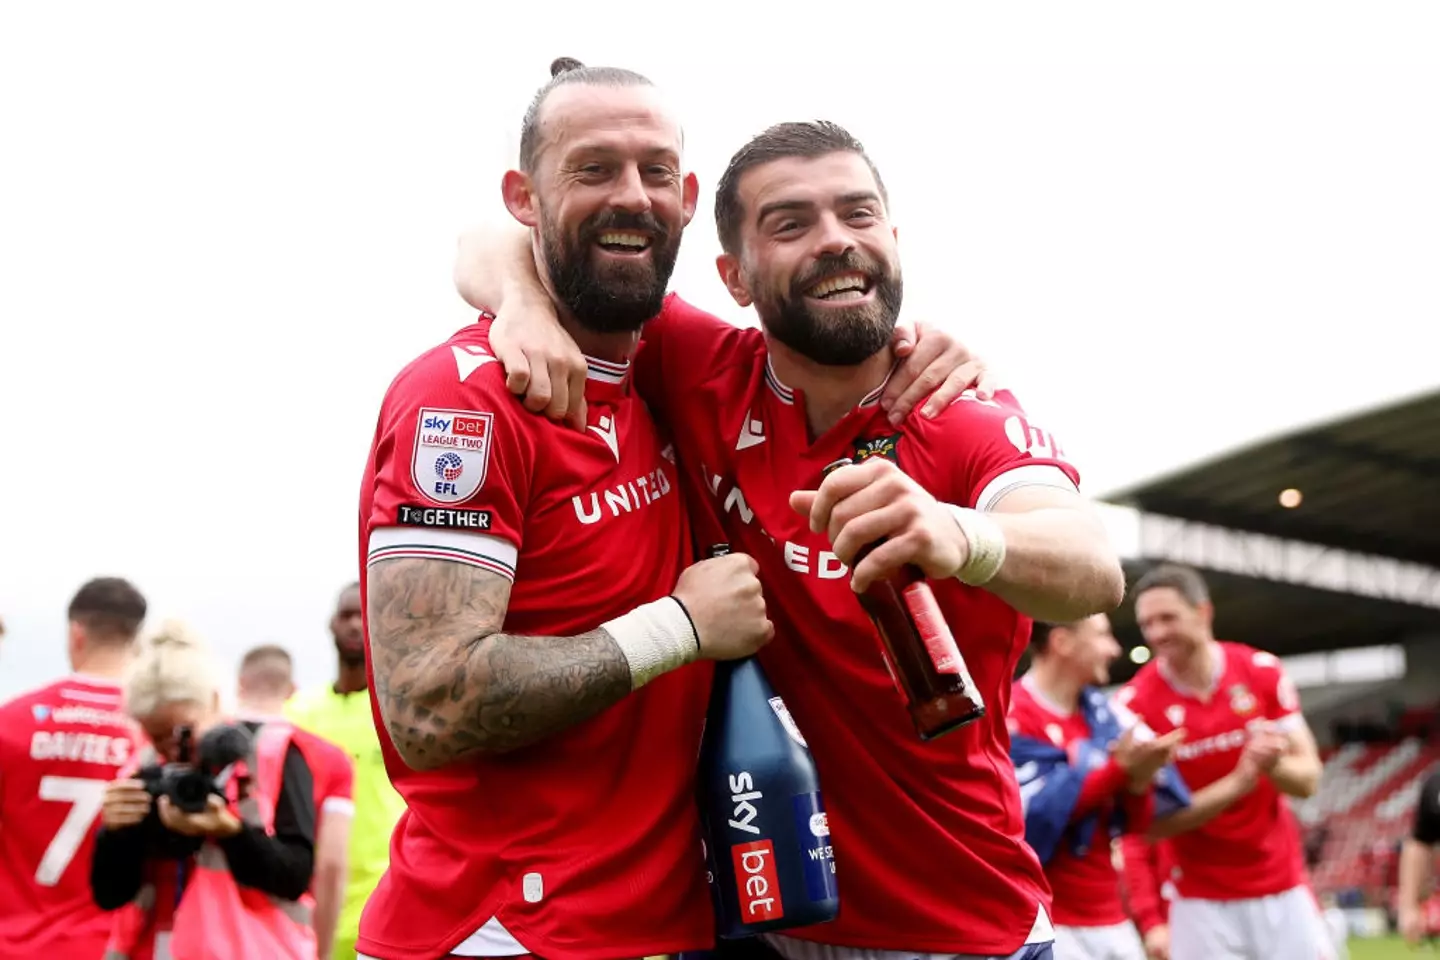 Wrexham's Steven Fletcher and Elliot Lee celebrate promotion from League Two (